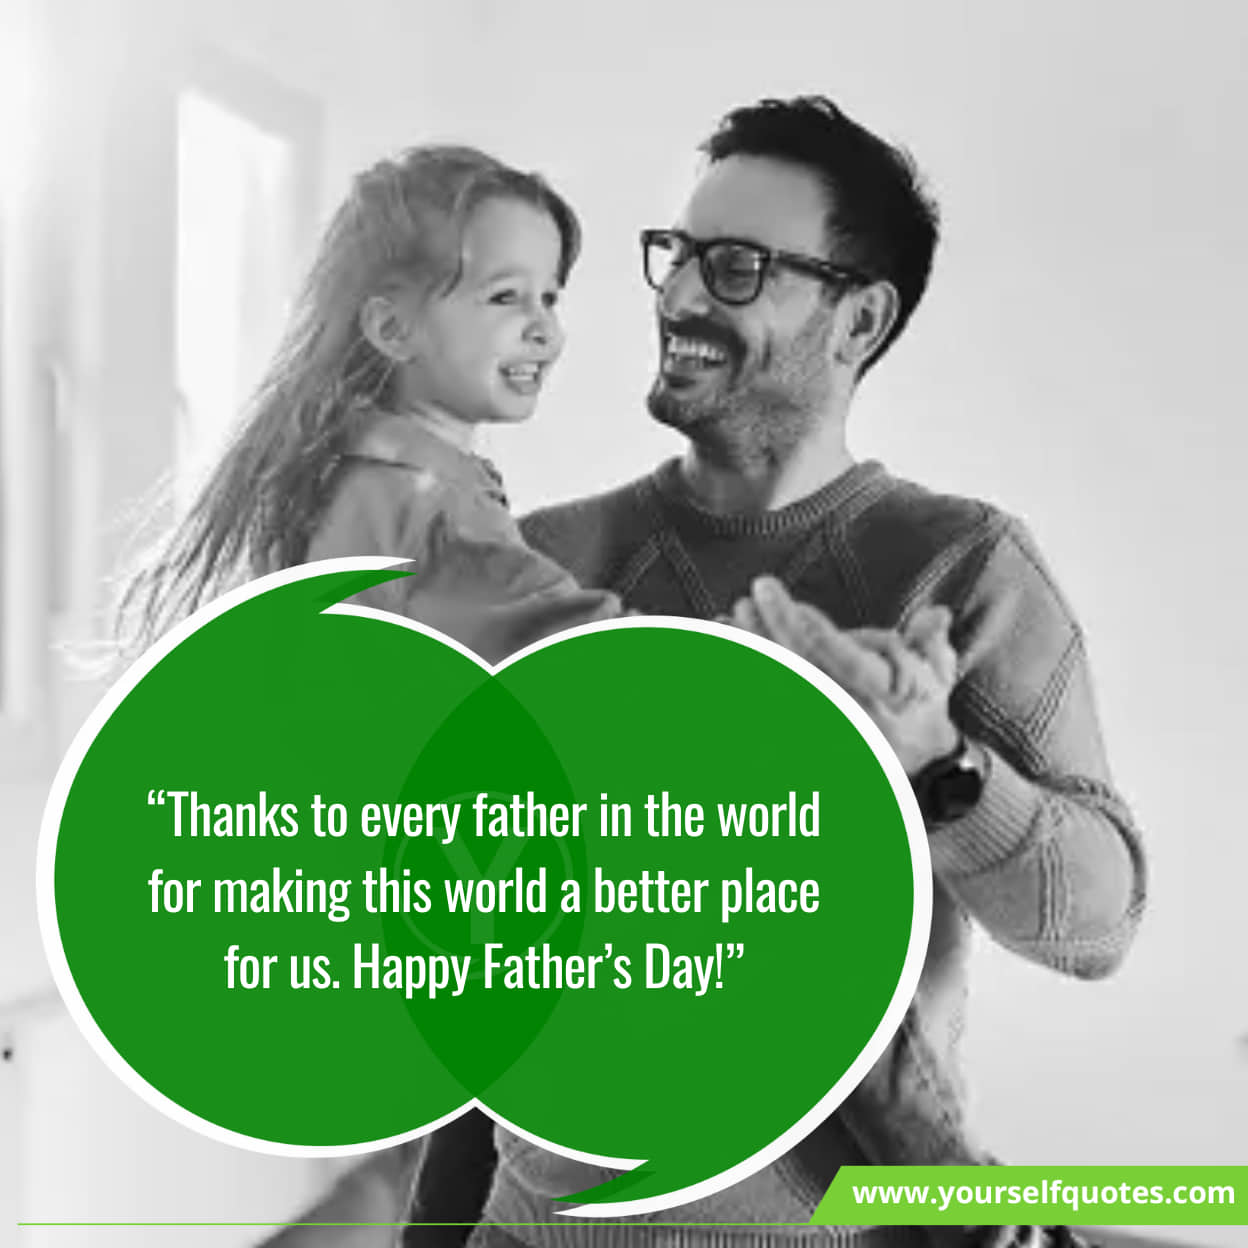 Loving wishes for the best dad in the world